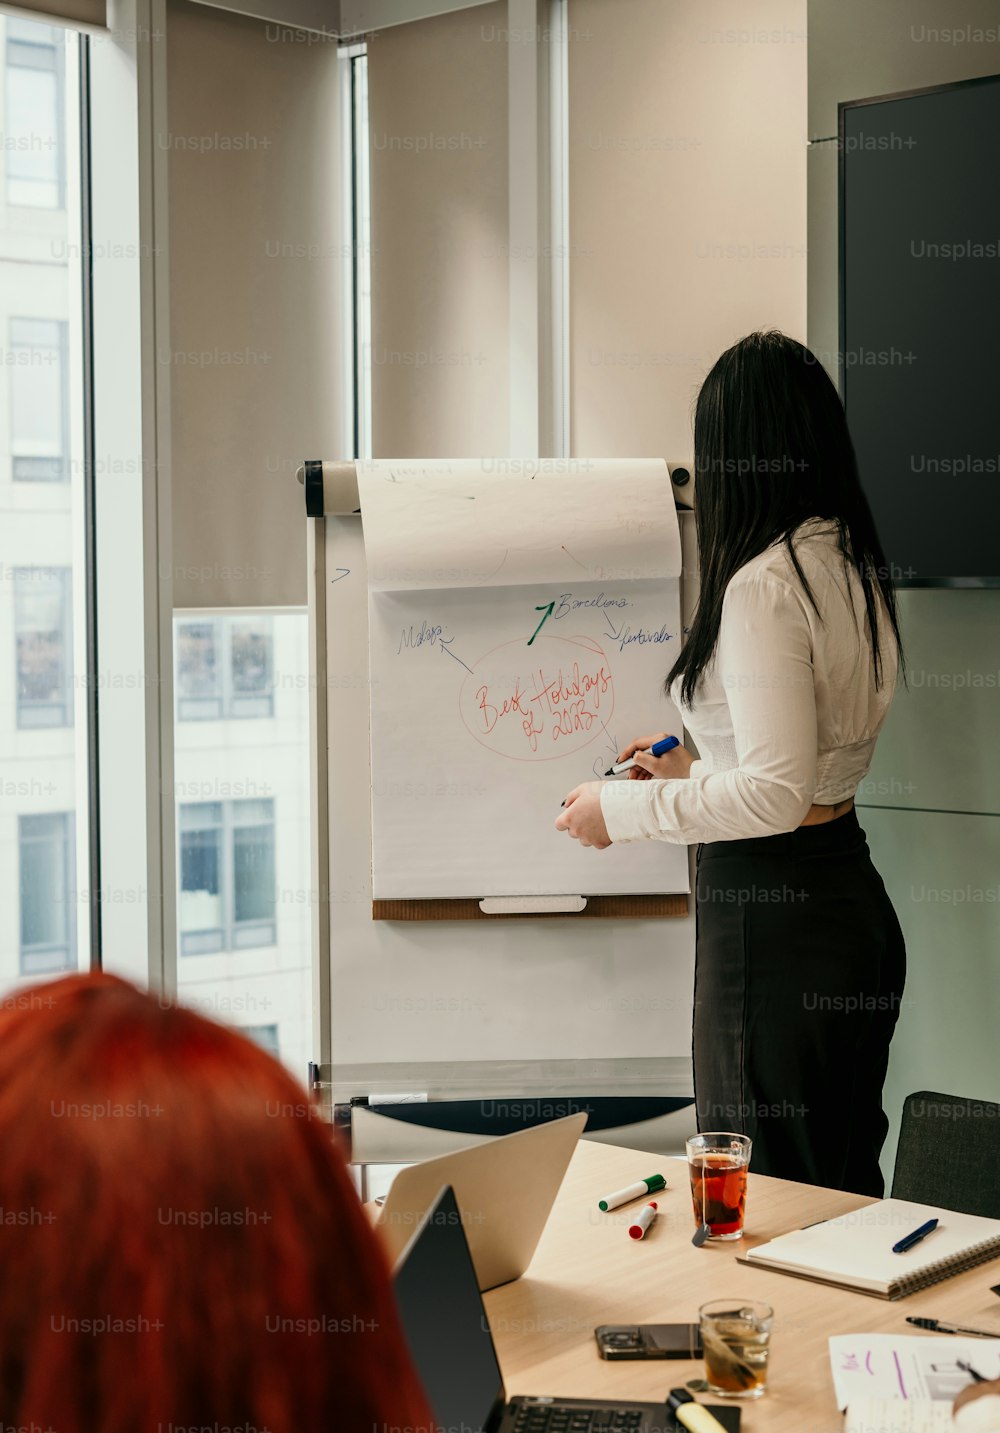 a woman standing in front of a whiteboard with writing on it